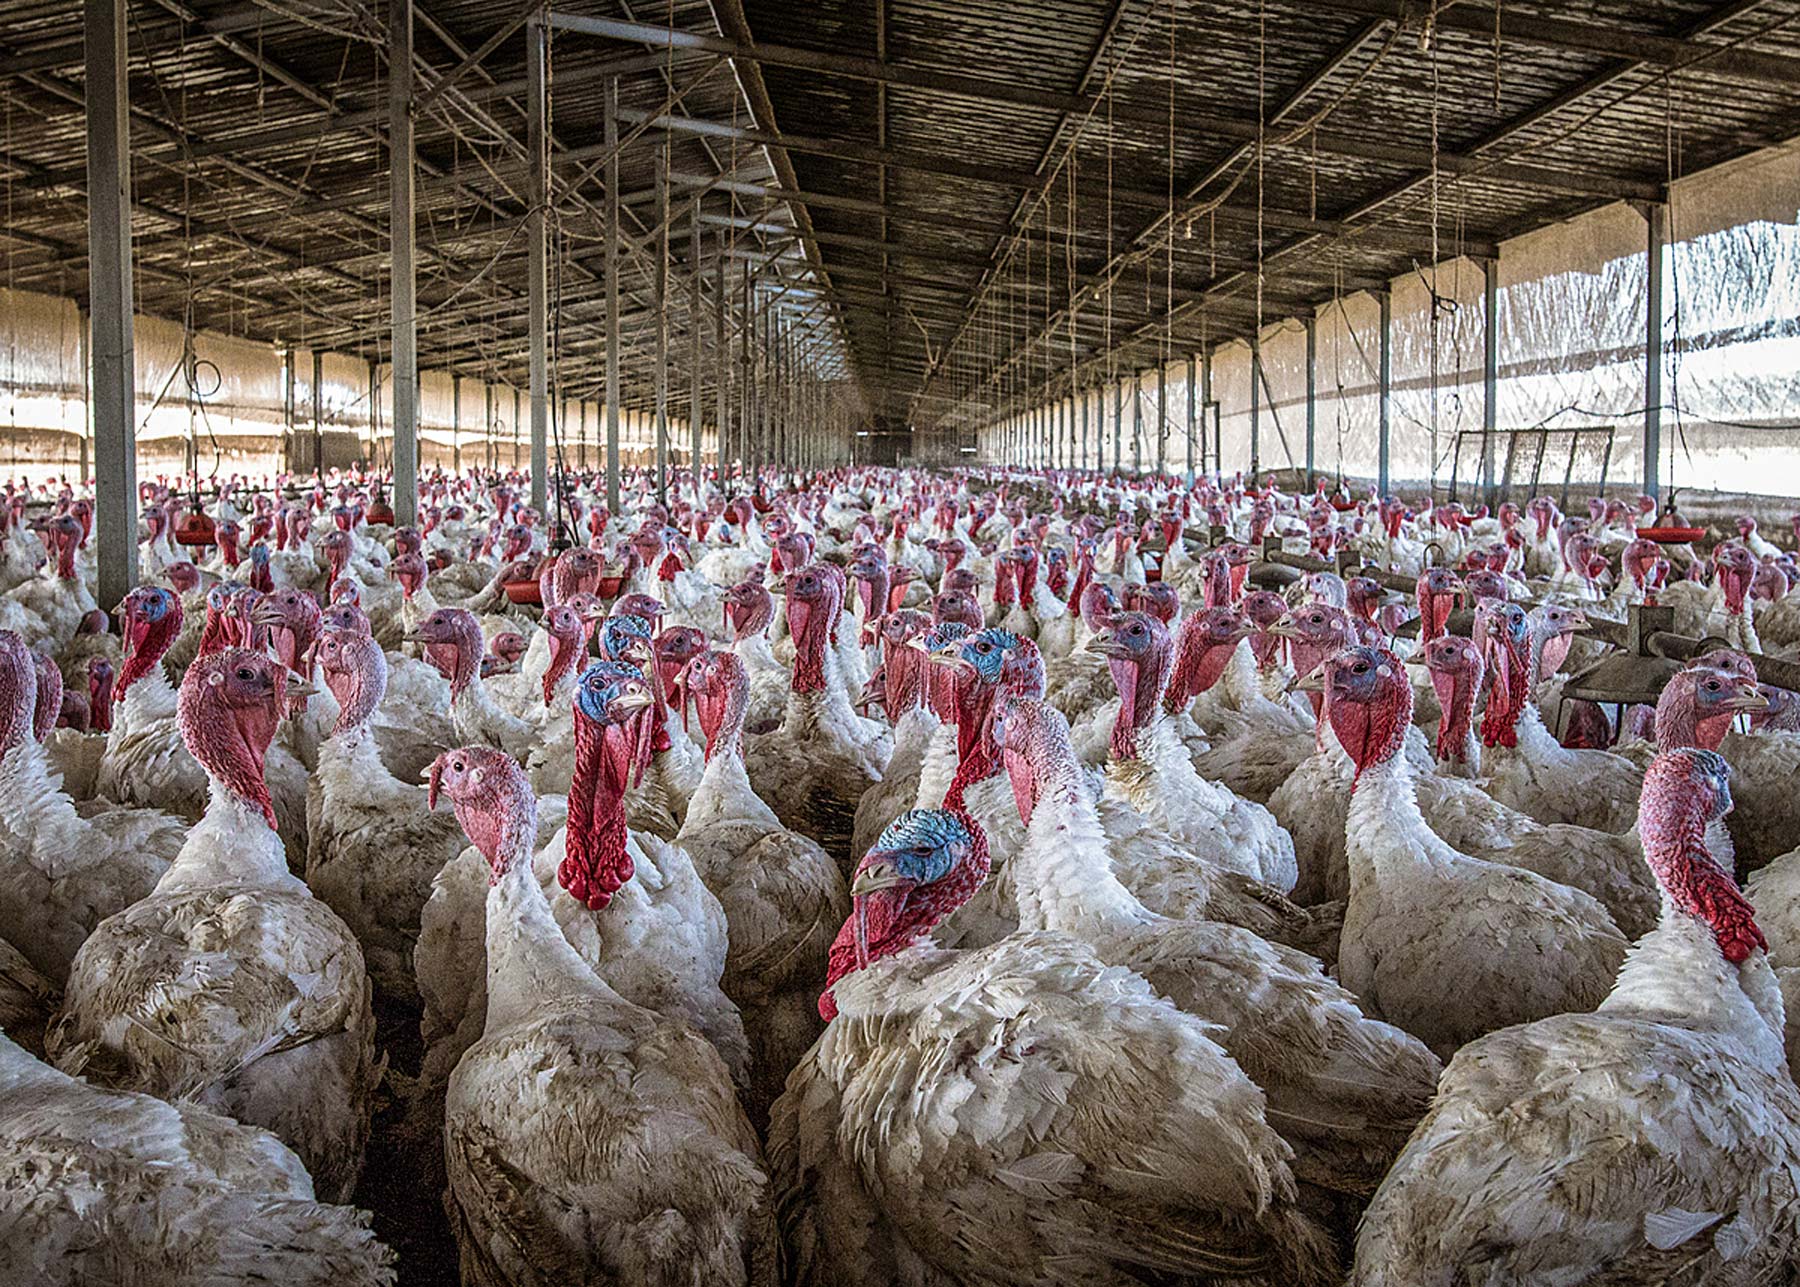 Thousands of turkeys crammed into a factory farm in Israel